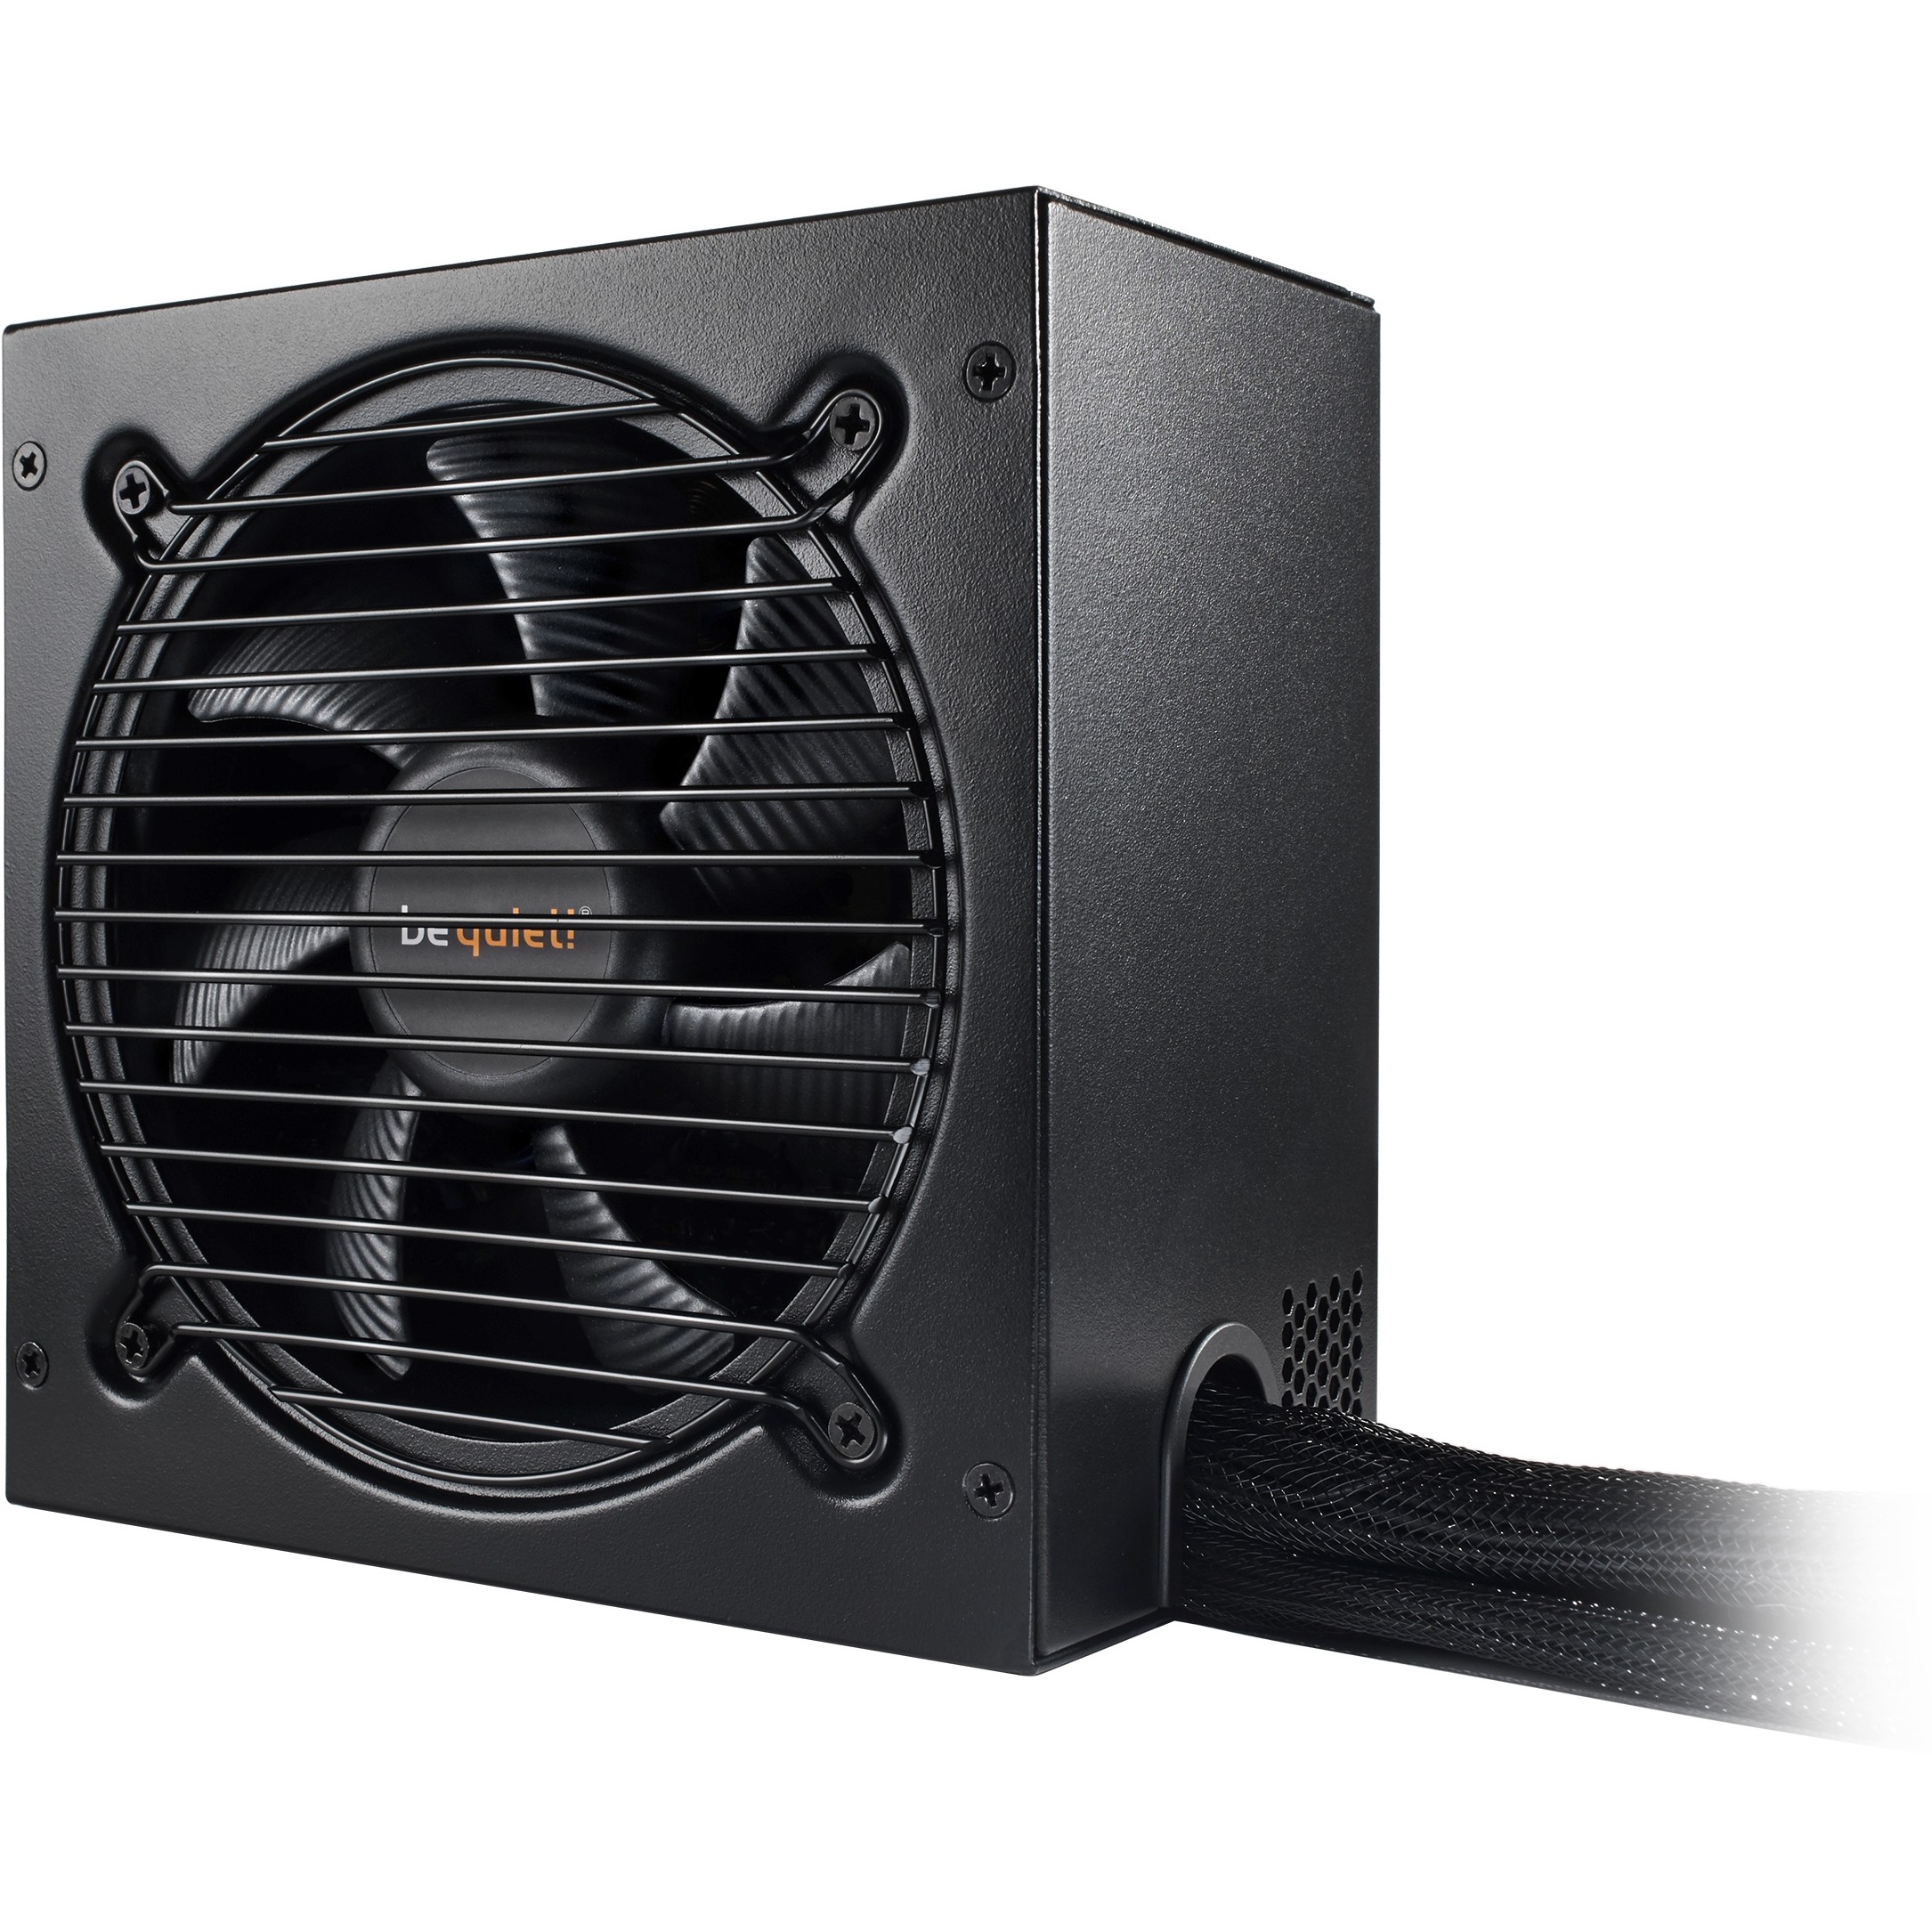 be quiet! Pure Power 11 400W power supply unit